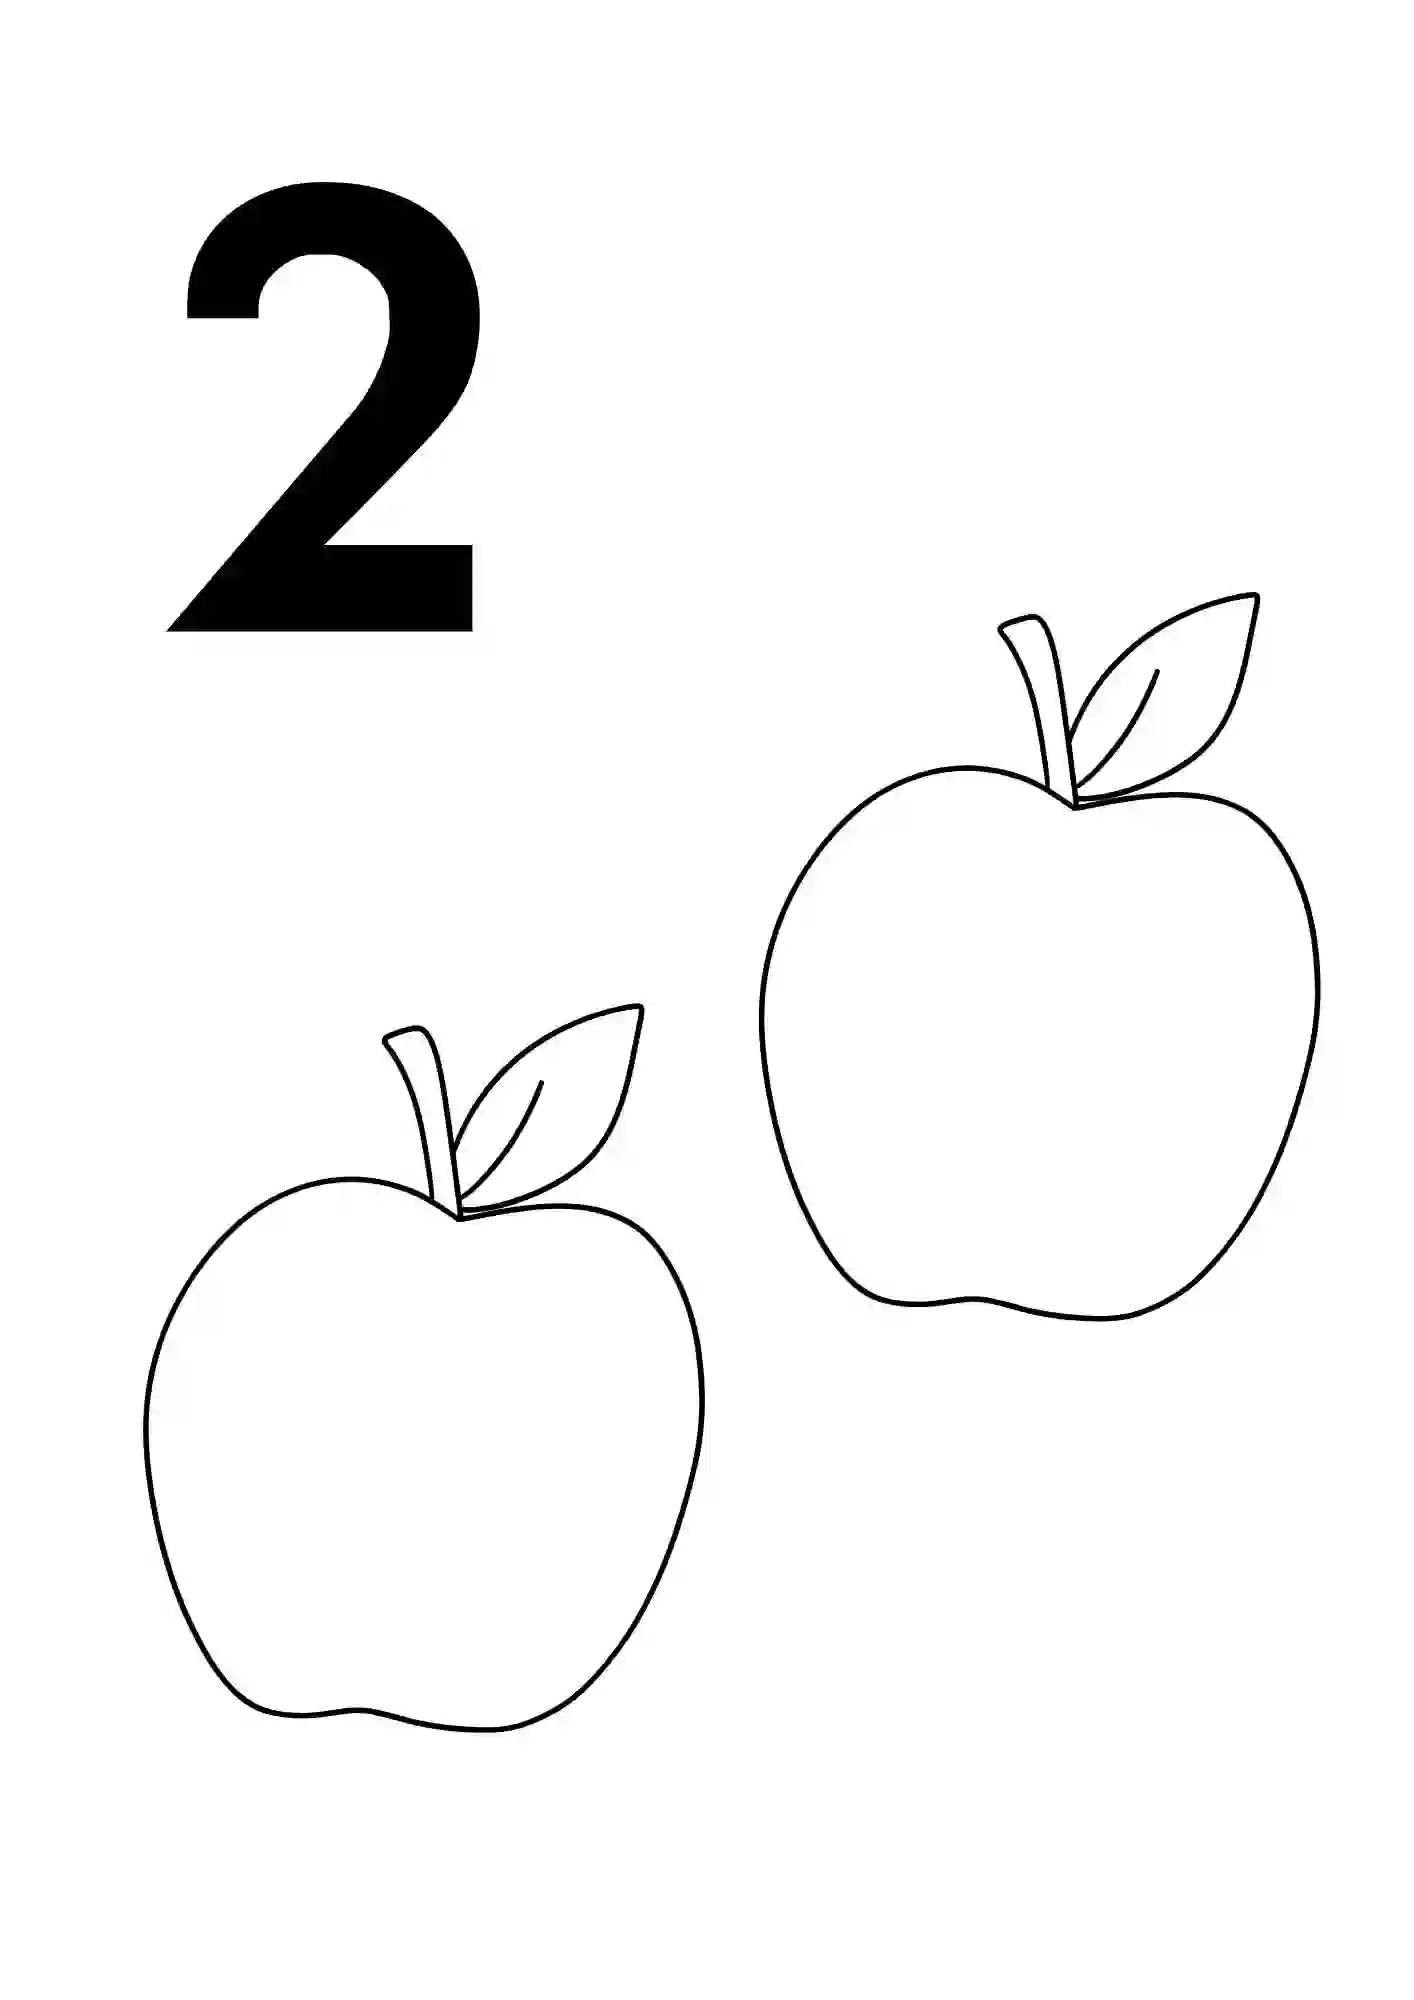 Count And Color Worksheets 1-10 (NUMBER 2)